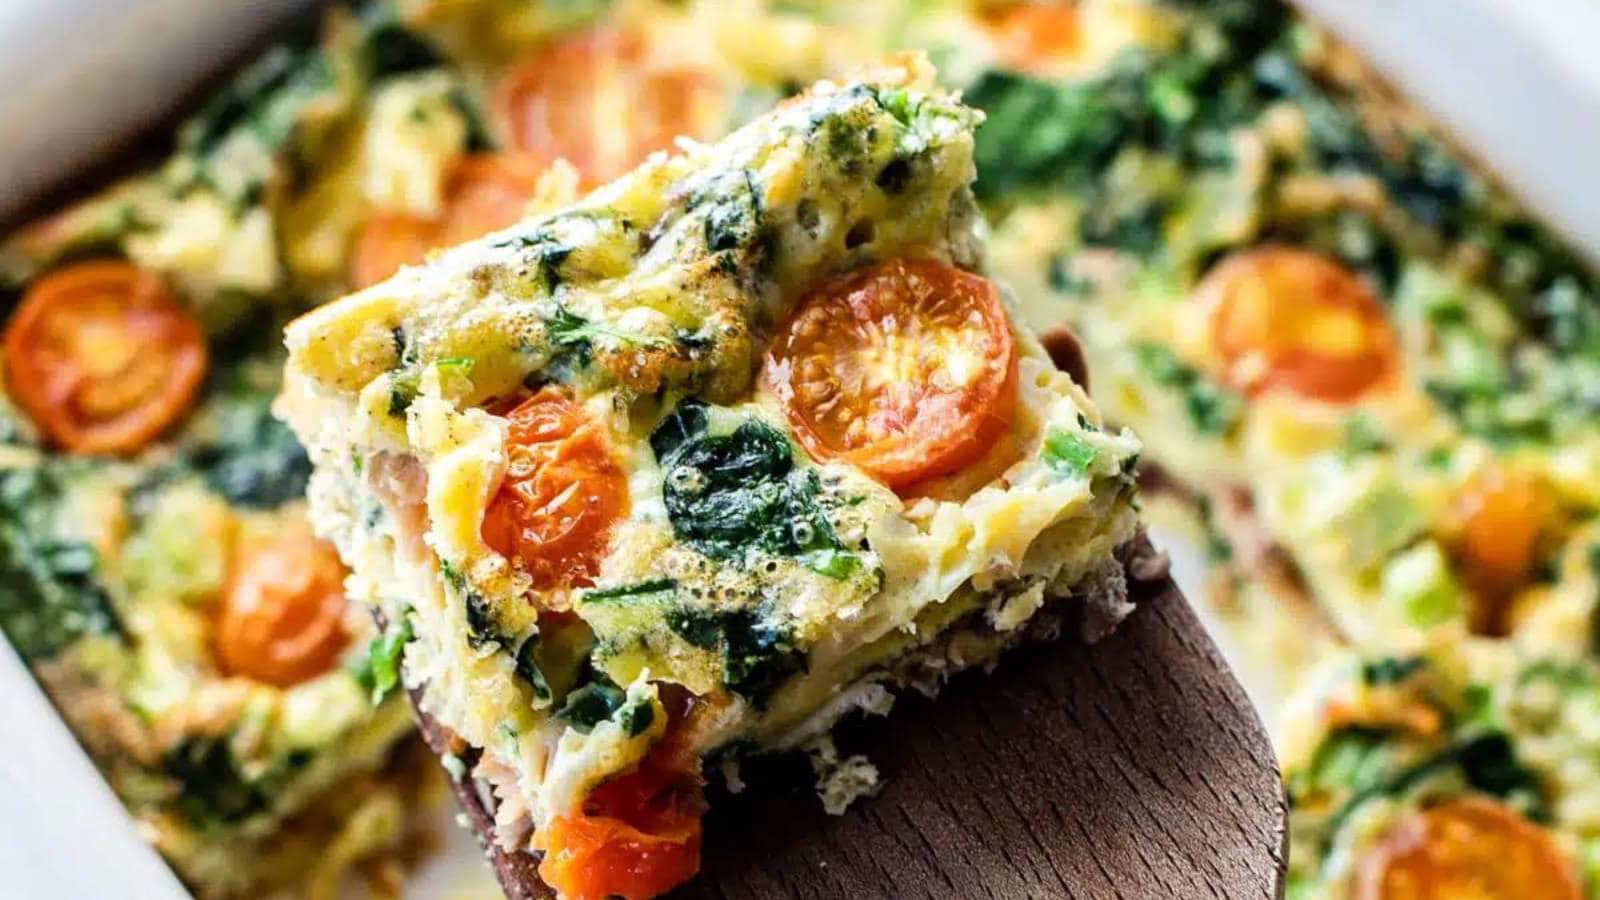 <p>Delicious smoked salmon breakfast casserole with tomatoes and spinach is just what your morning needs! It is incredibly easy to make with just 6 ingredients, is protein-packed, full of colorful, healthy vegetables, and will keep you full for longer!</p><p><strong>Get the Recipe: <a href="https://www.fitmamarealfood.com/smoked-salmon-breakfast-casserole-tomatoes-spinach" rel="noreferrer noopener">Smoked Salmon Breakfast Casserole</a></strong></p>